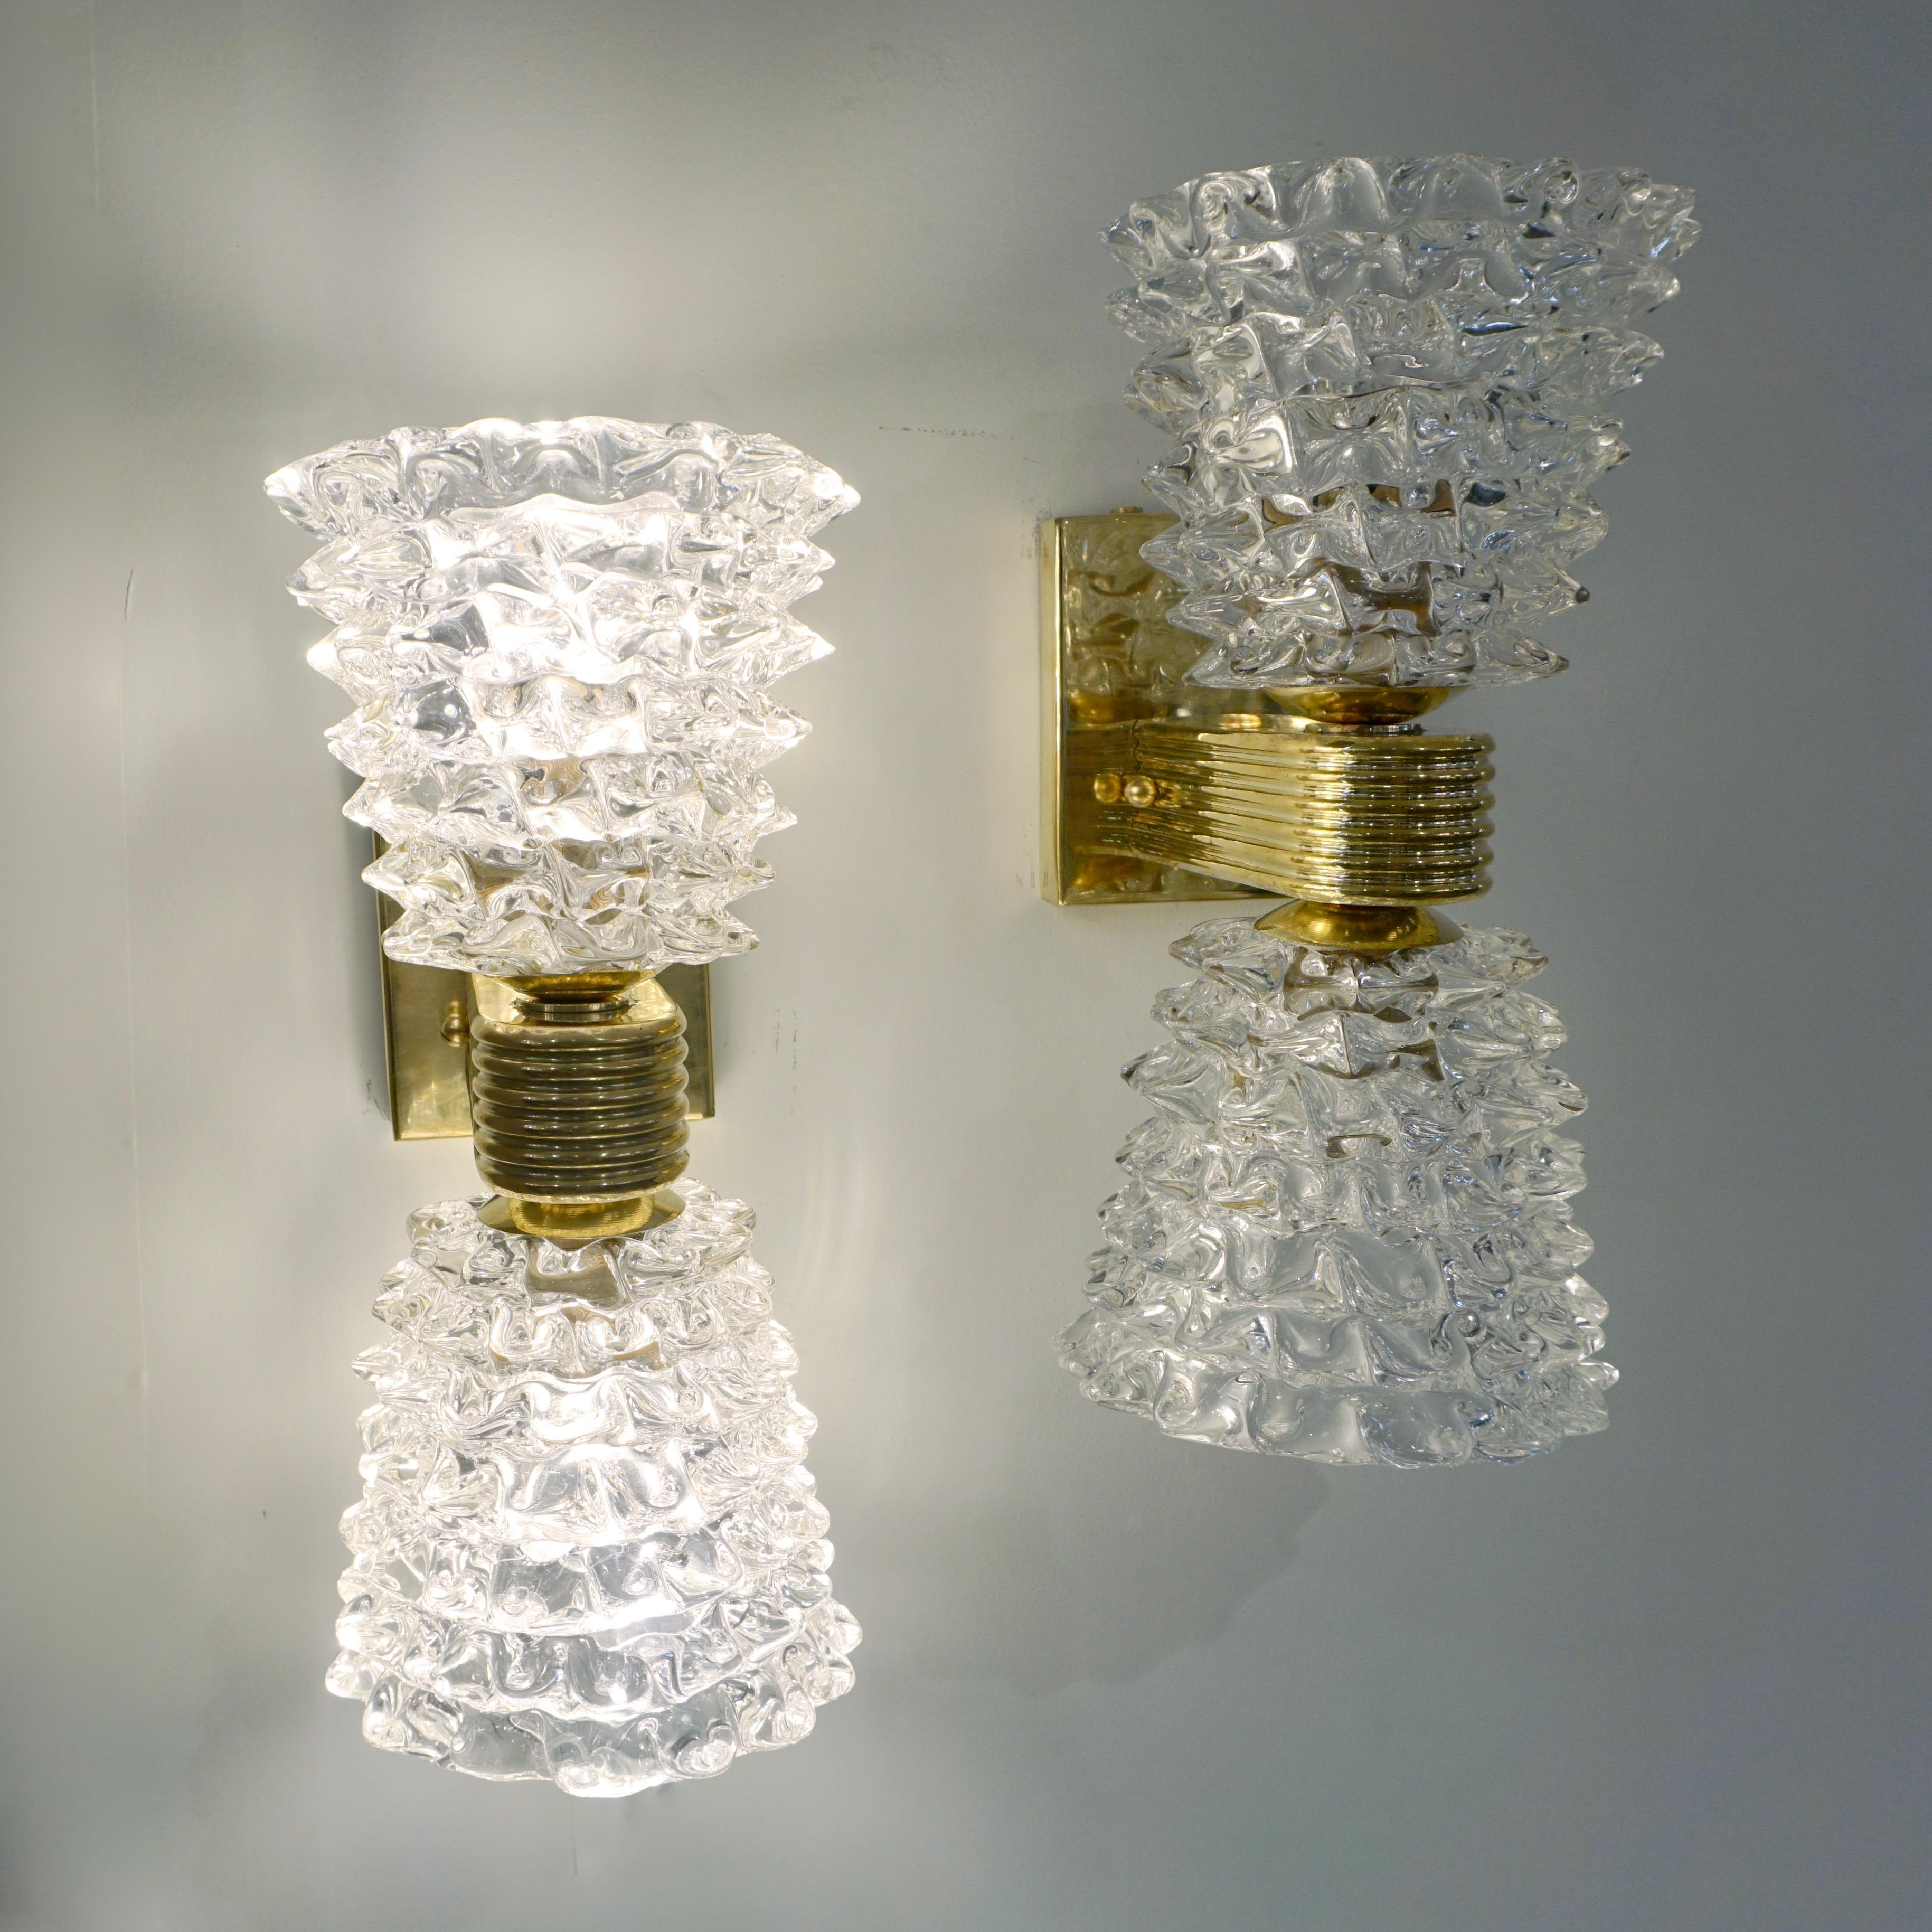 Contemporary Italian Rostrato Crystal Murano Glass & Brass Double-Lit Sconces For Sale 5